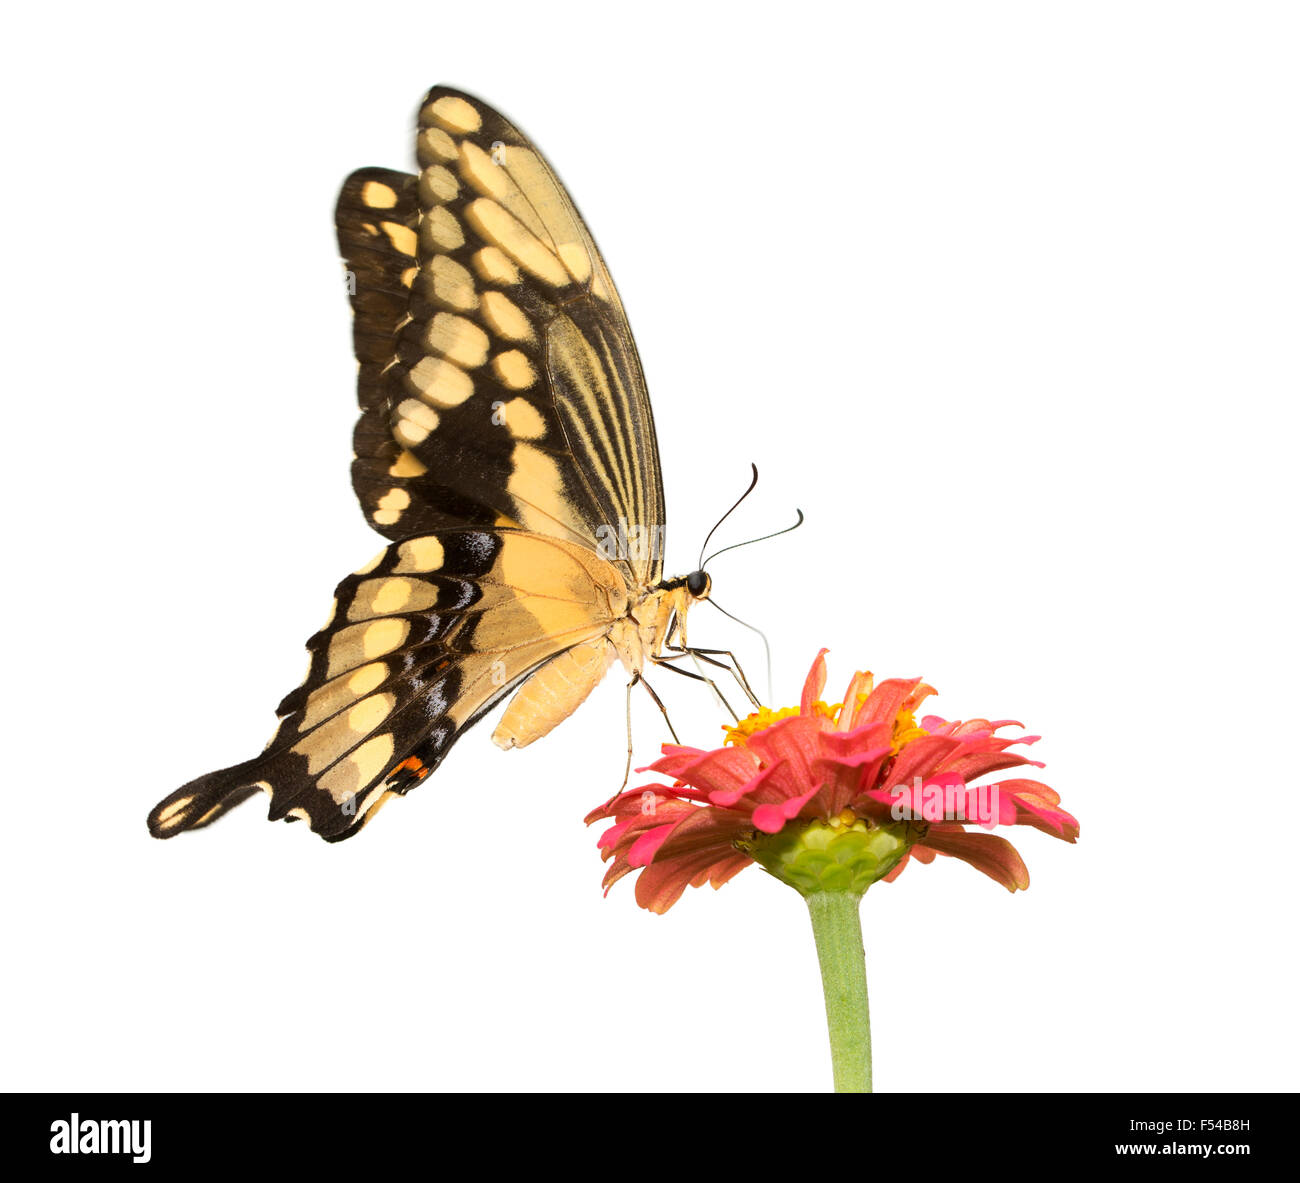 papilio Cresphontes, Giant Swallowtail butterfly feeding on a pink Zinnia - isolated on white Stock Photo